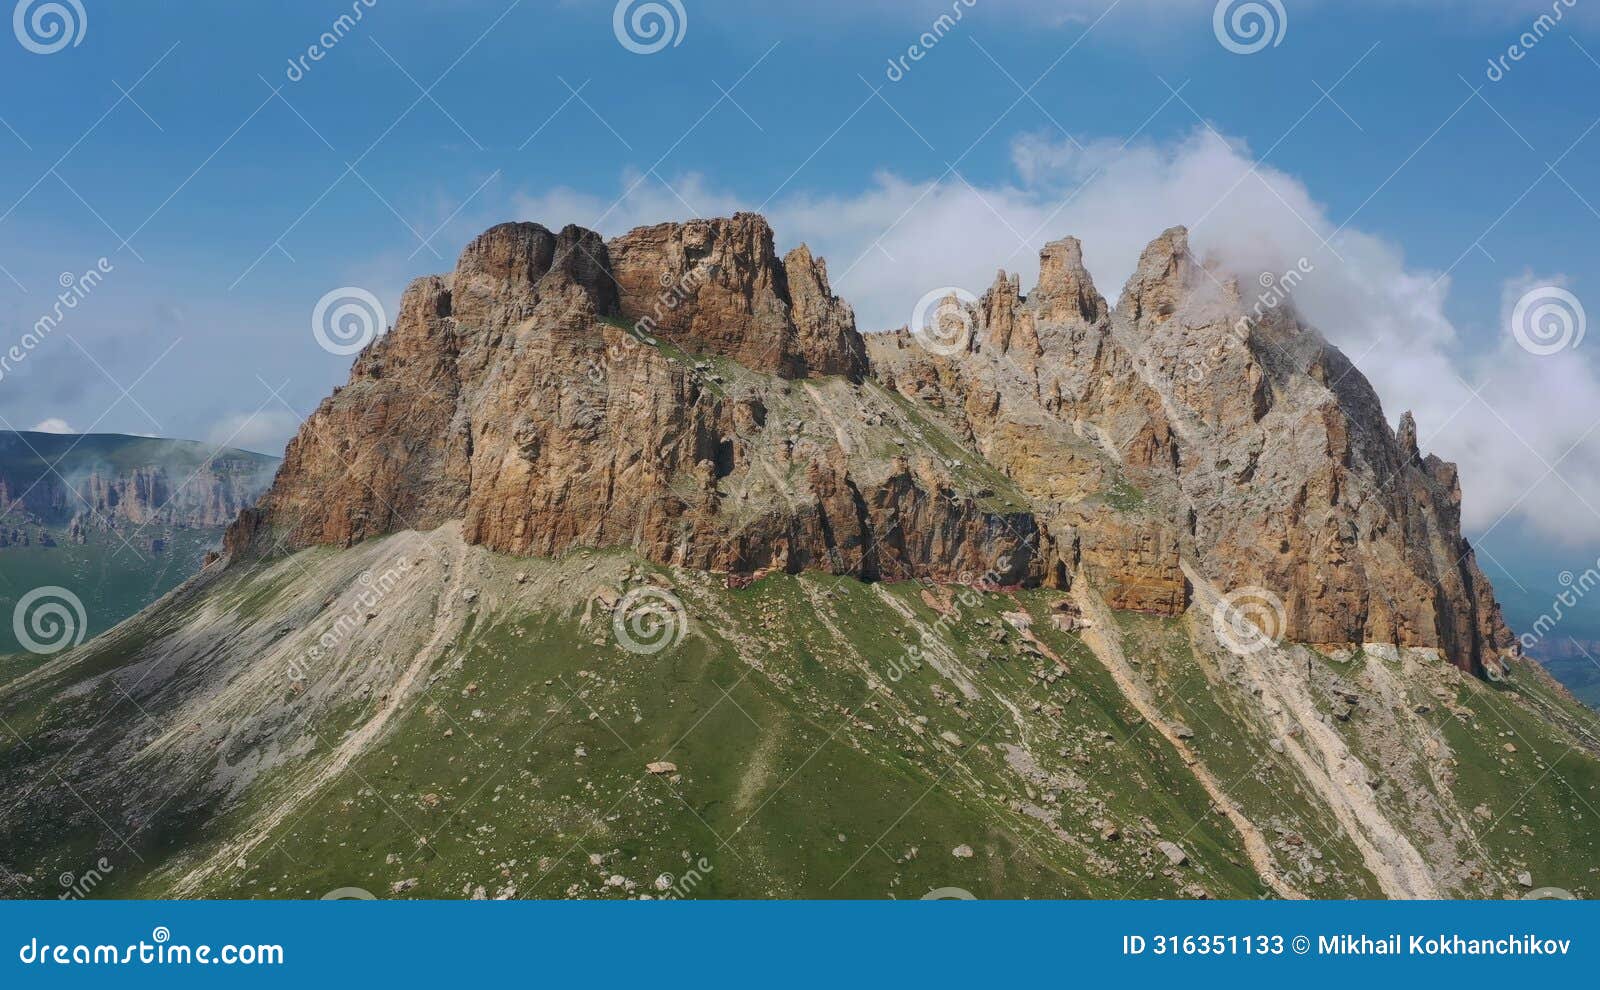 mother-in-law teeth caucasus mountain